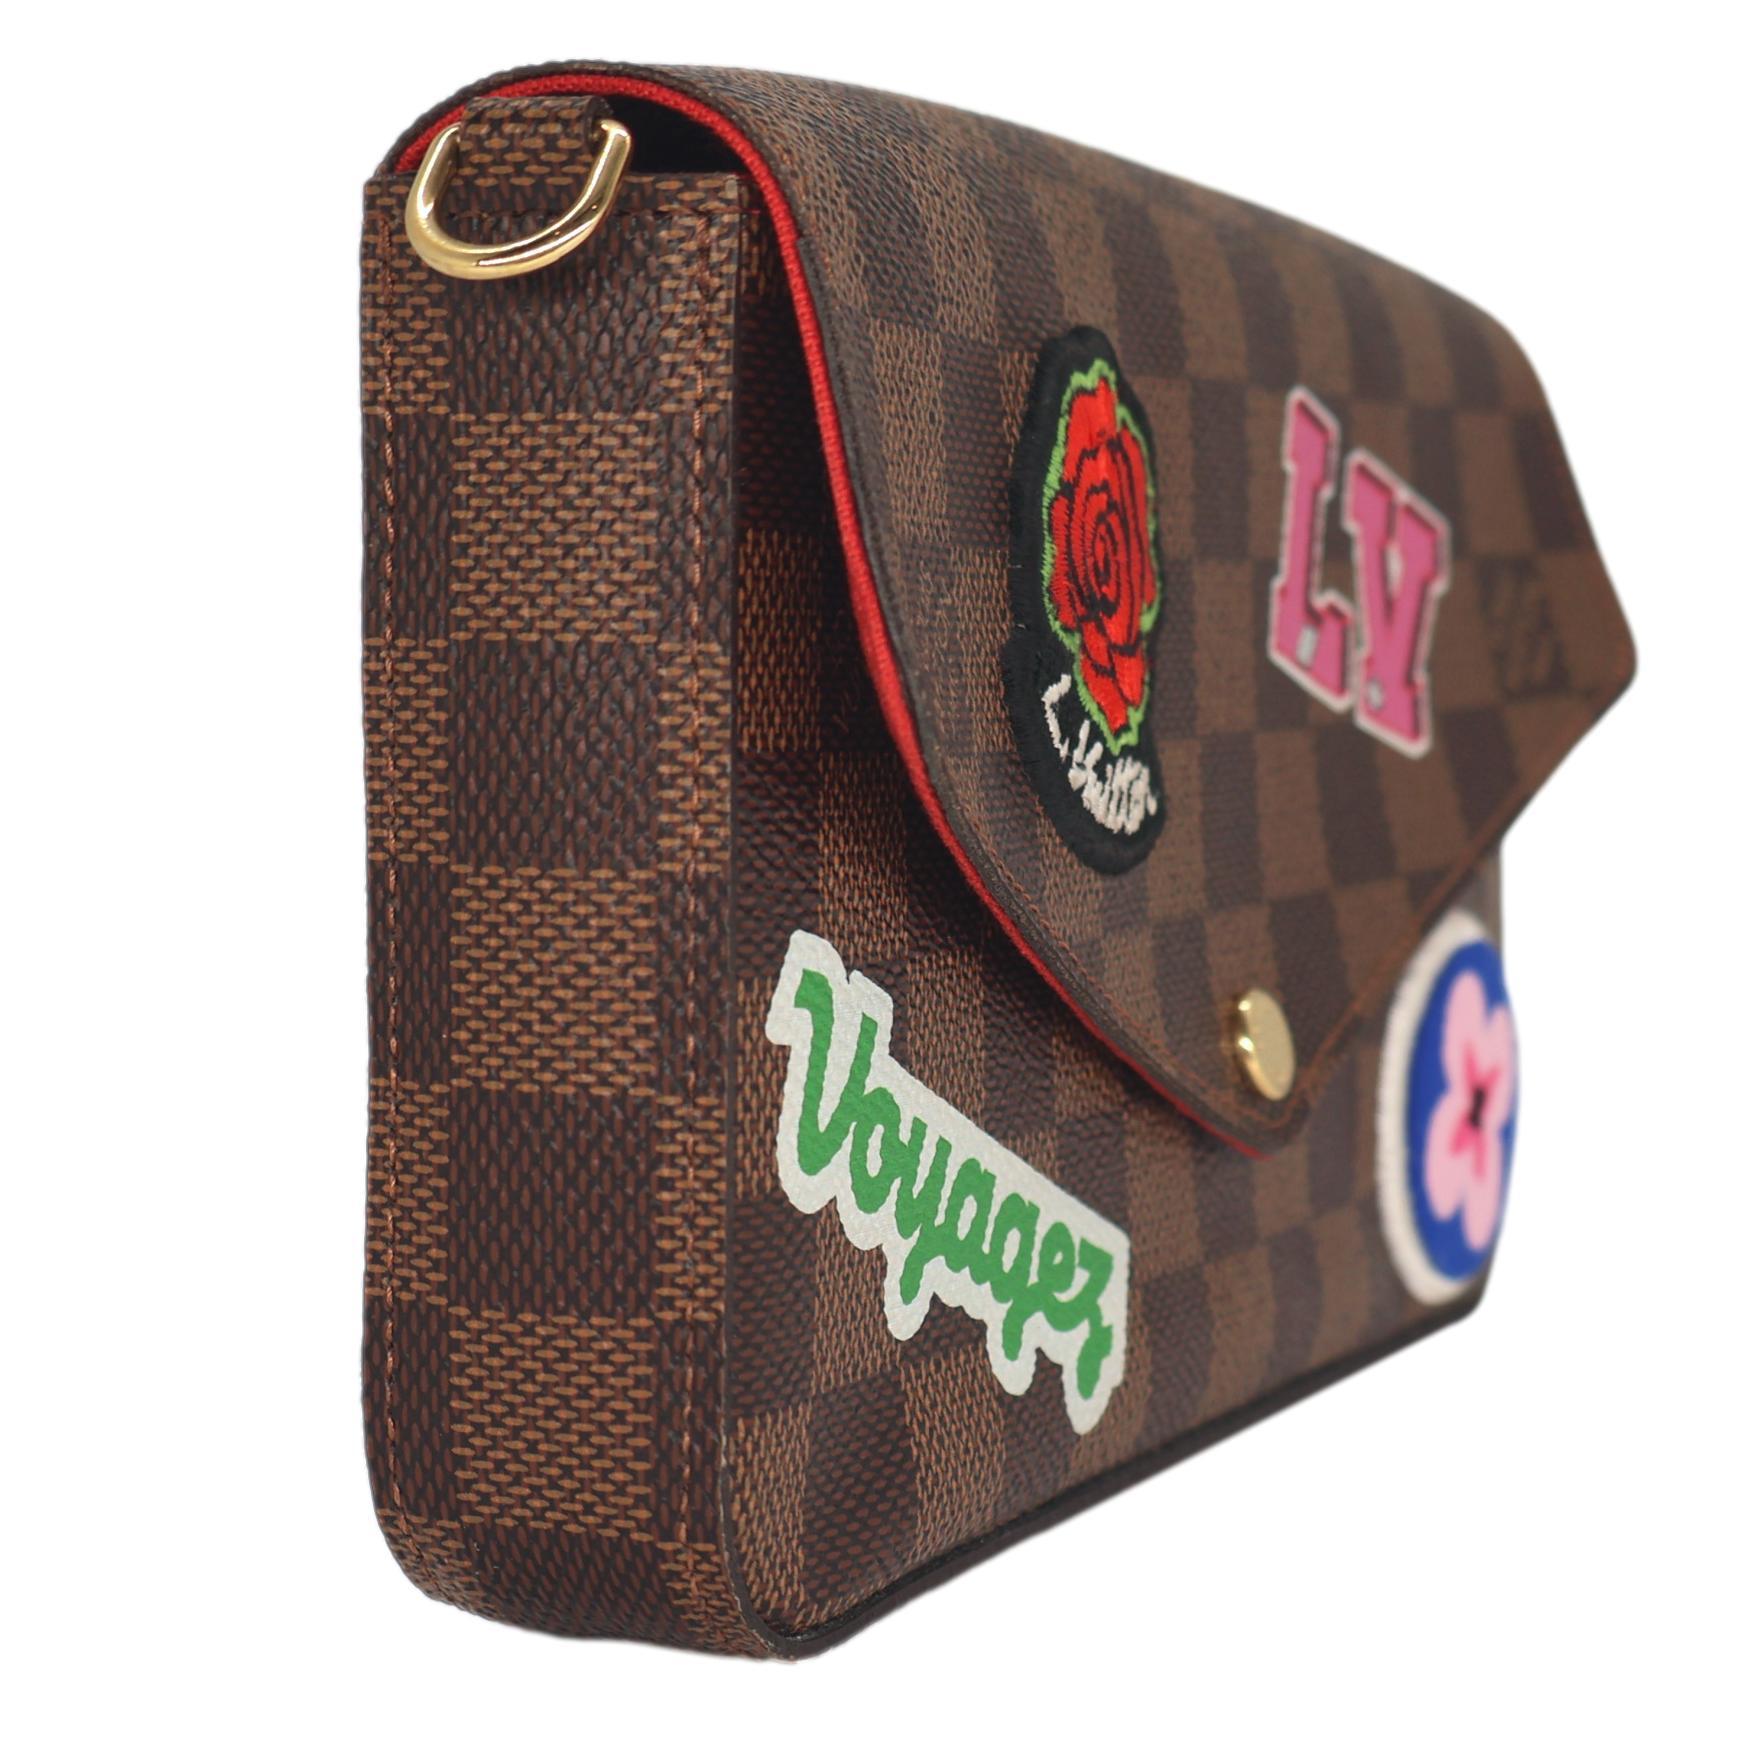 Louis Vuitton Damier Ebene Limited Edition World Tour Pochette Félicie, 2018. This iconic pochette is a piece of Louis Vuitton history that was first introduced in the the early 1900's as an accessory pouch to accompany larger bags. As the early